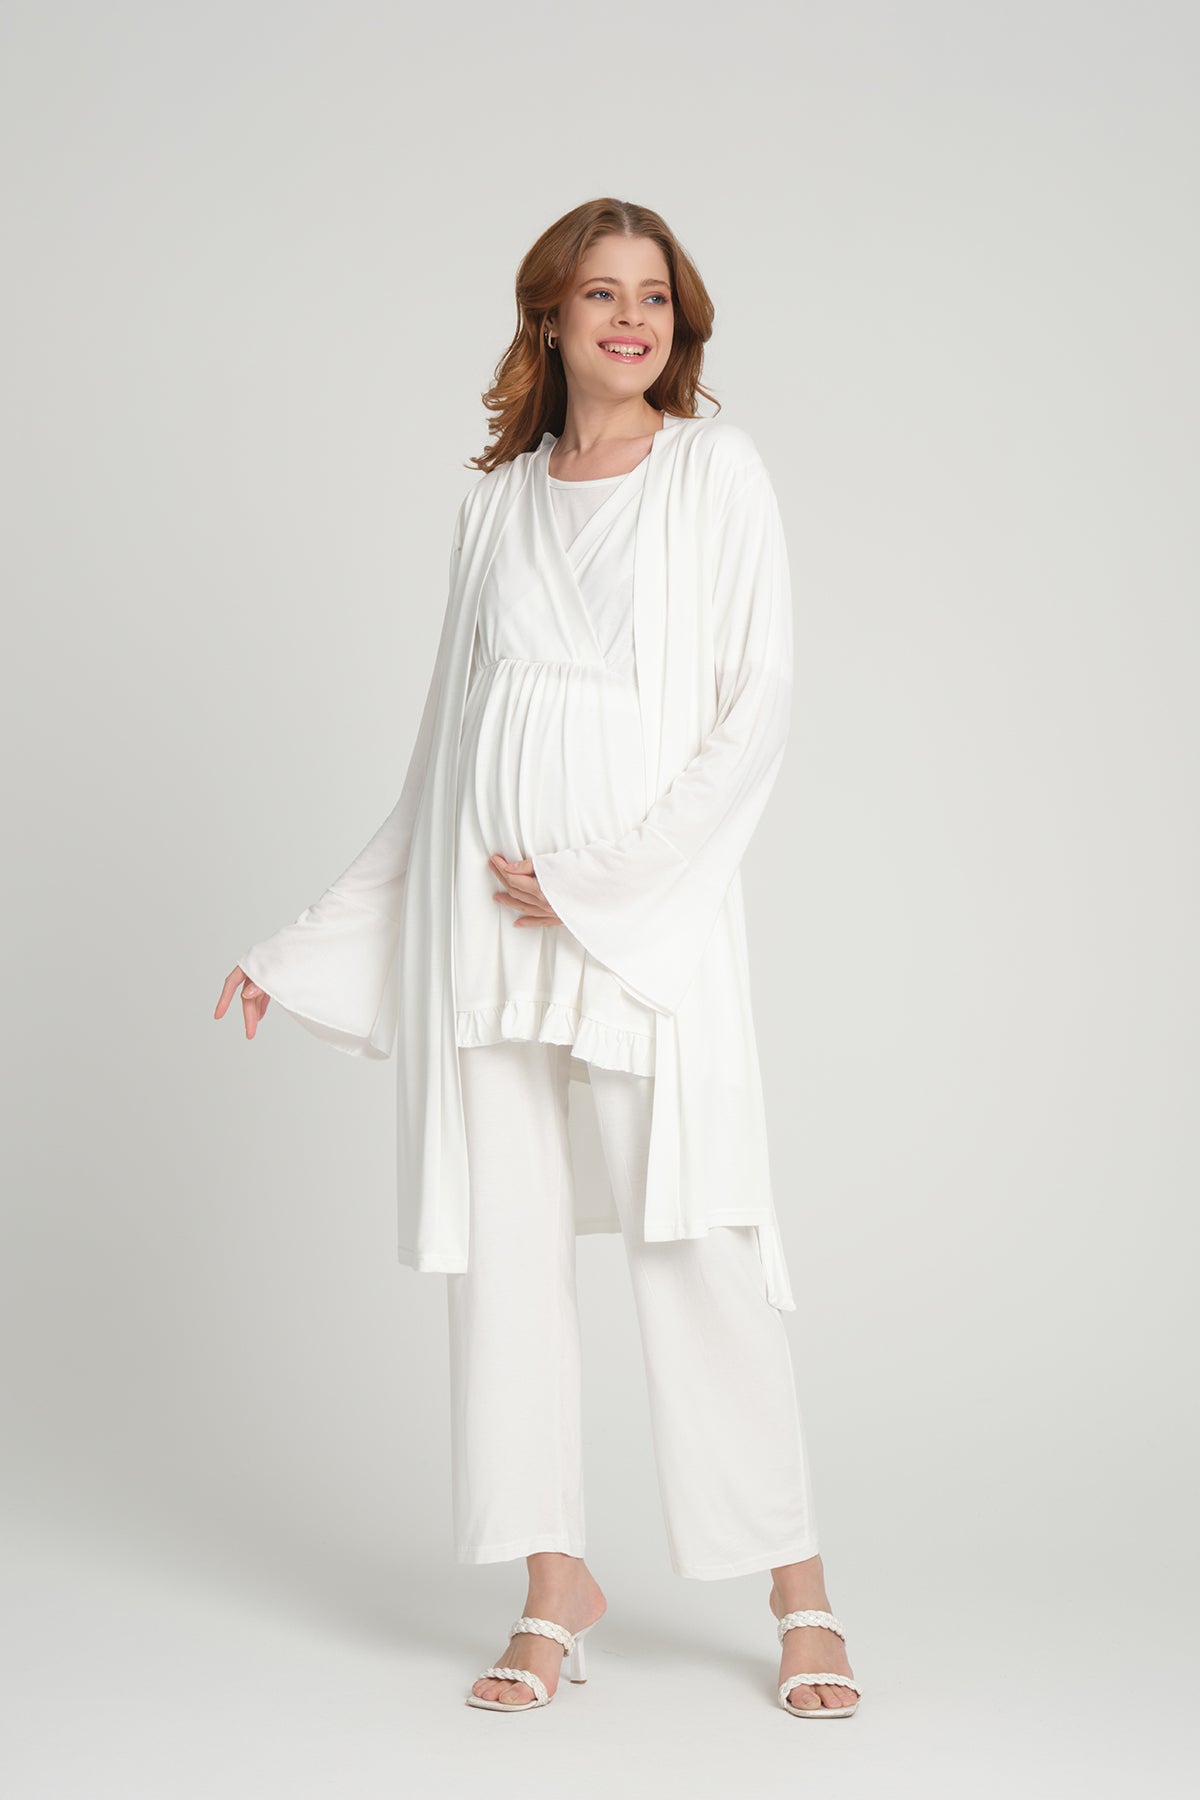 Shopymommy 205 Double Breasted 3-Pieces Maternity & Nursing Pajamas With Flywheel Arm Robe Ecru